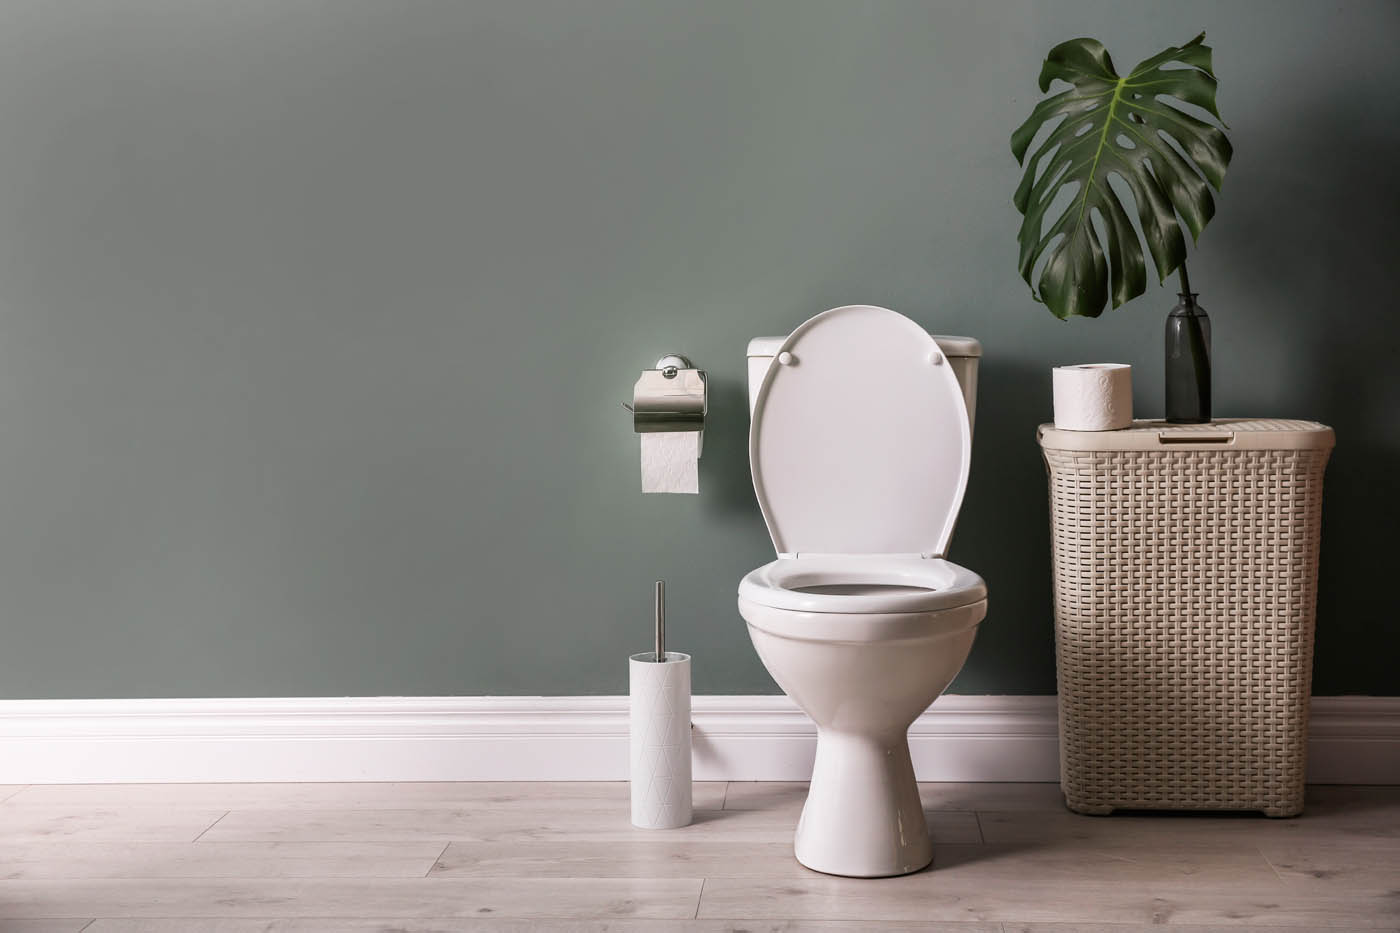 A gray bathroom with a white toilet and a toilet bowl cleaner, contact our experts at WyattWorks today if you are in need of a Ohio & North Carolina 24 hour plumber. 